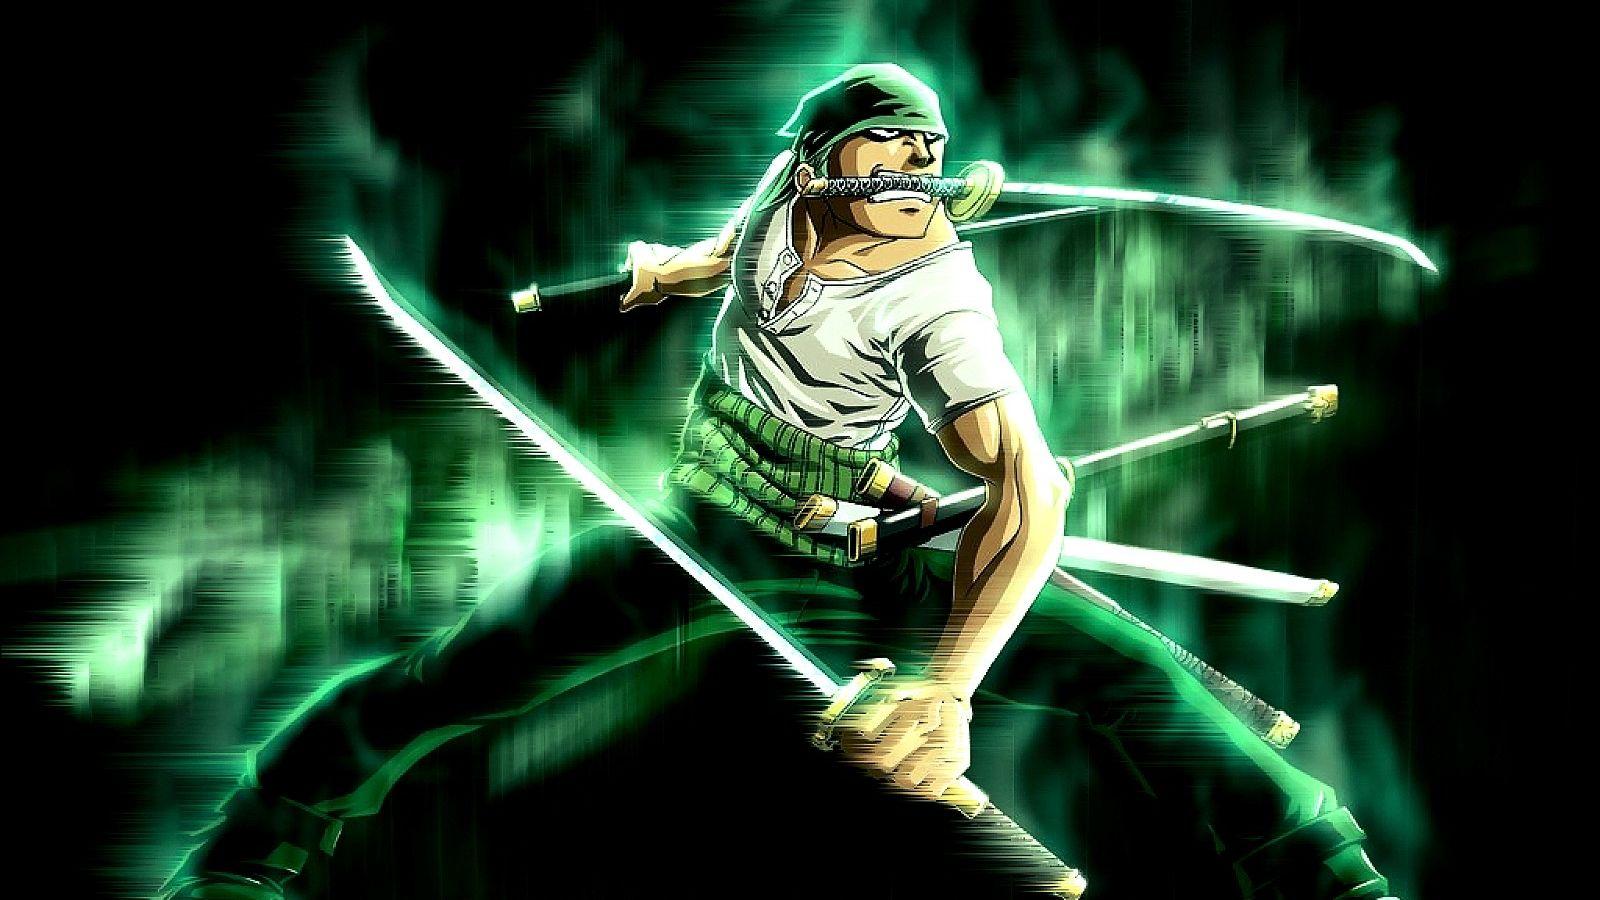 Zoro Android Wallpapers - Top Free Zoro Android Backgrounds ...